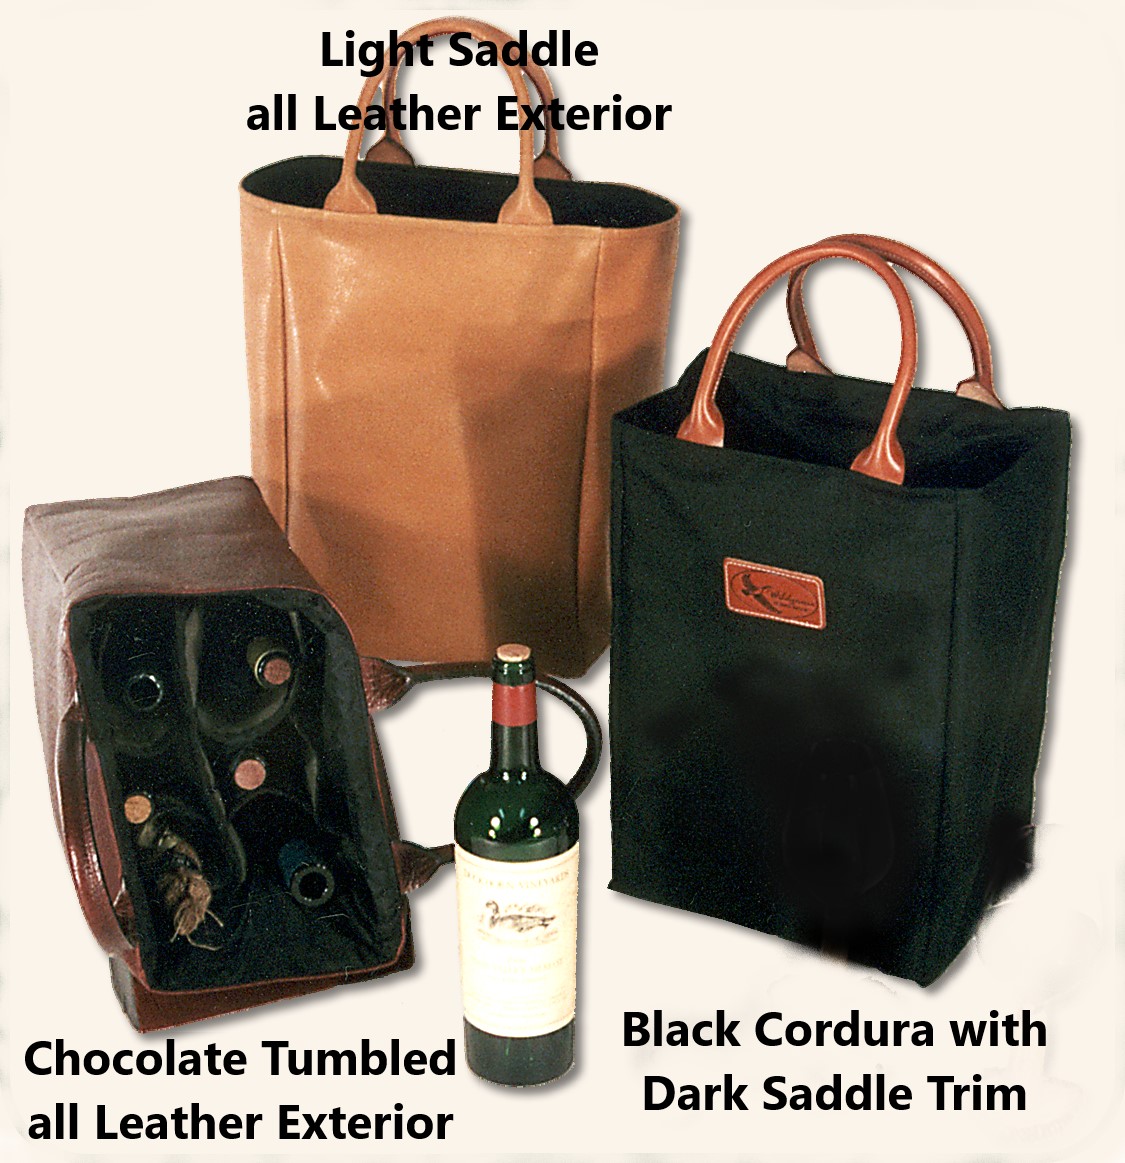 6 Bottle Wine Bag with Rolled Leather Handles